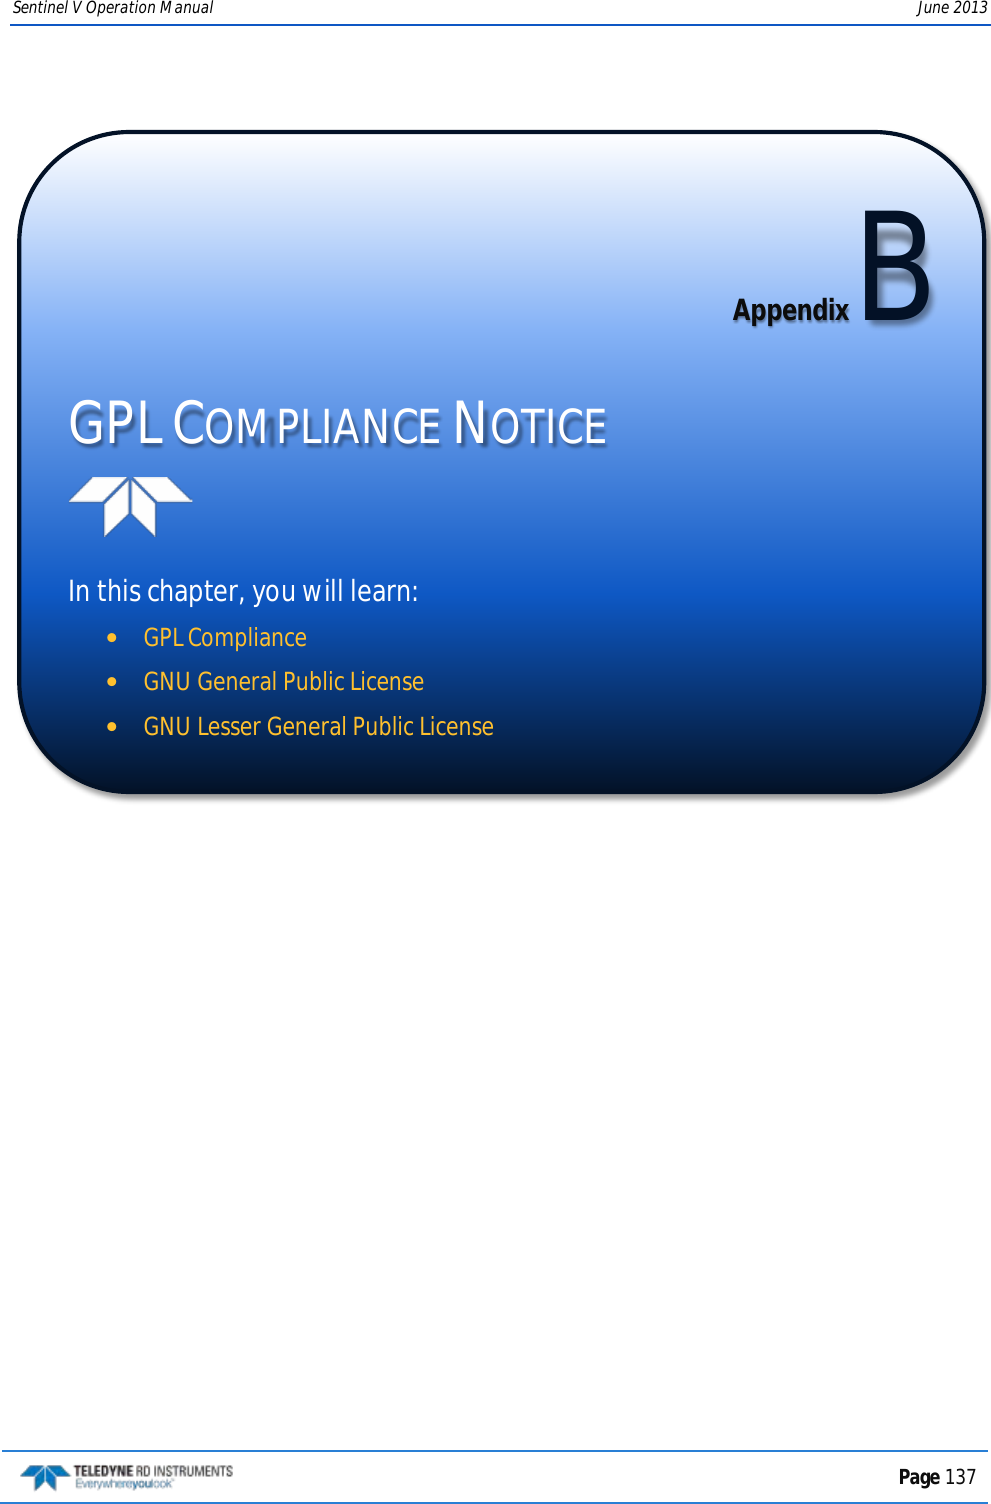 Sentinel V Operation Manual June 2013        Appendix B GPL COMPLIANCE NOTICE   In this chapter, you will learn: •GPL Compliance •GNU General Public License  •GNU Lesser General Public License   Page 137  